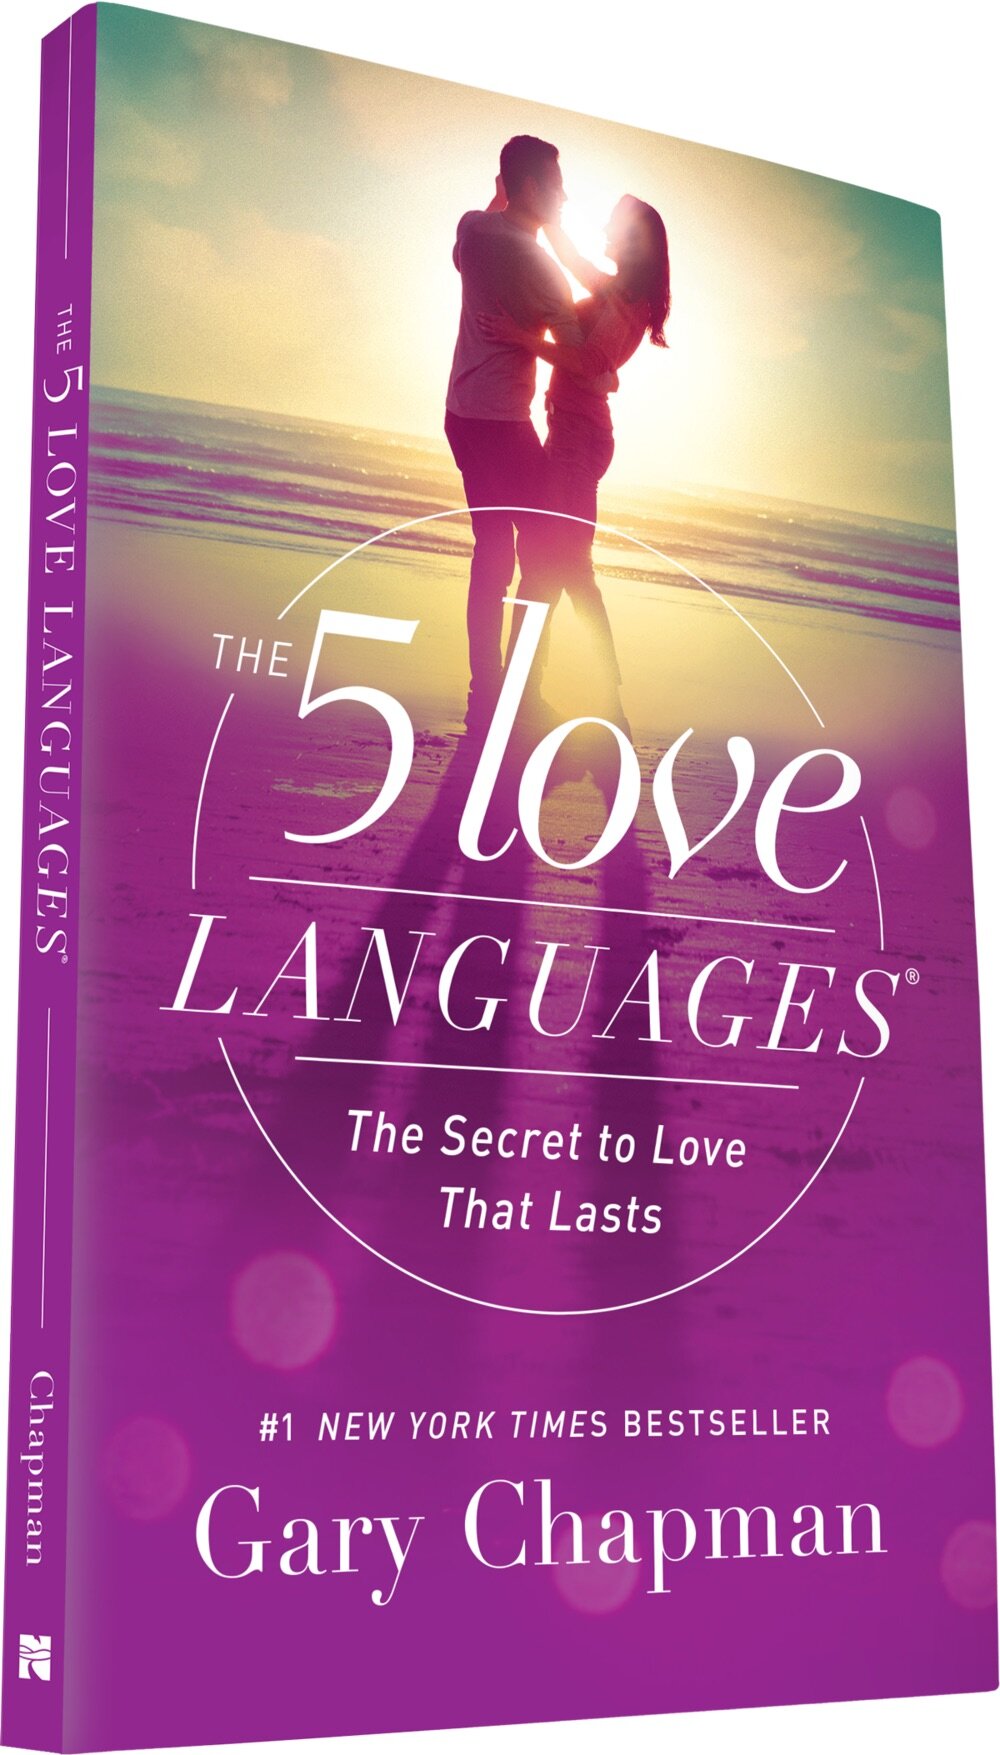 the 5 love languages and our weaknesses with them.